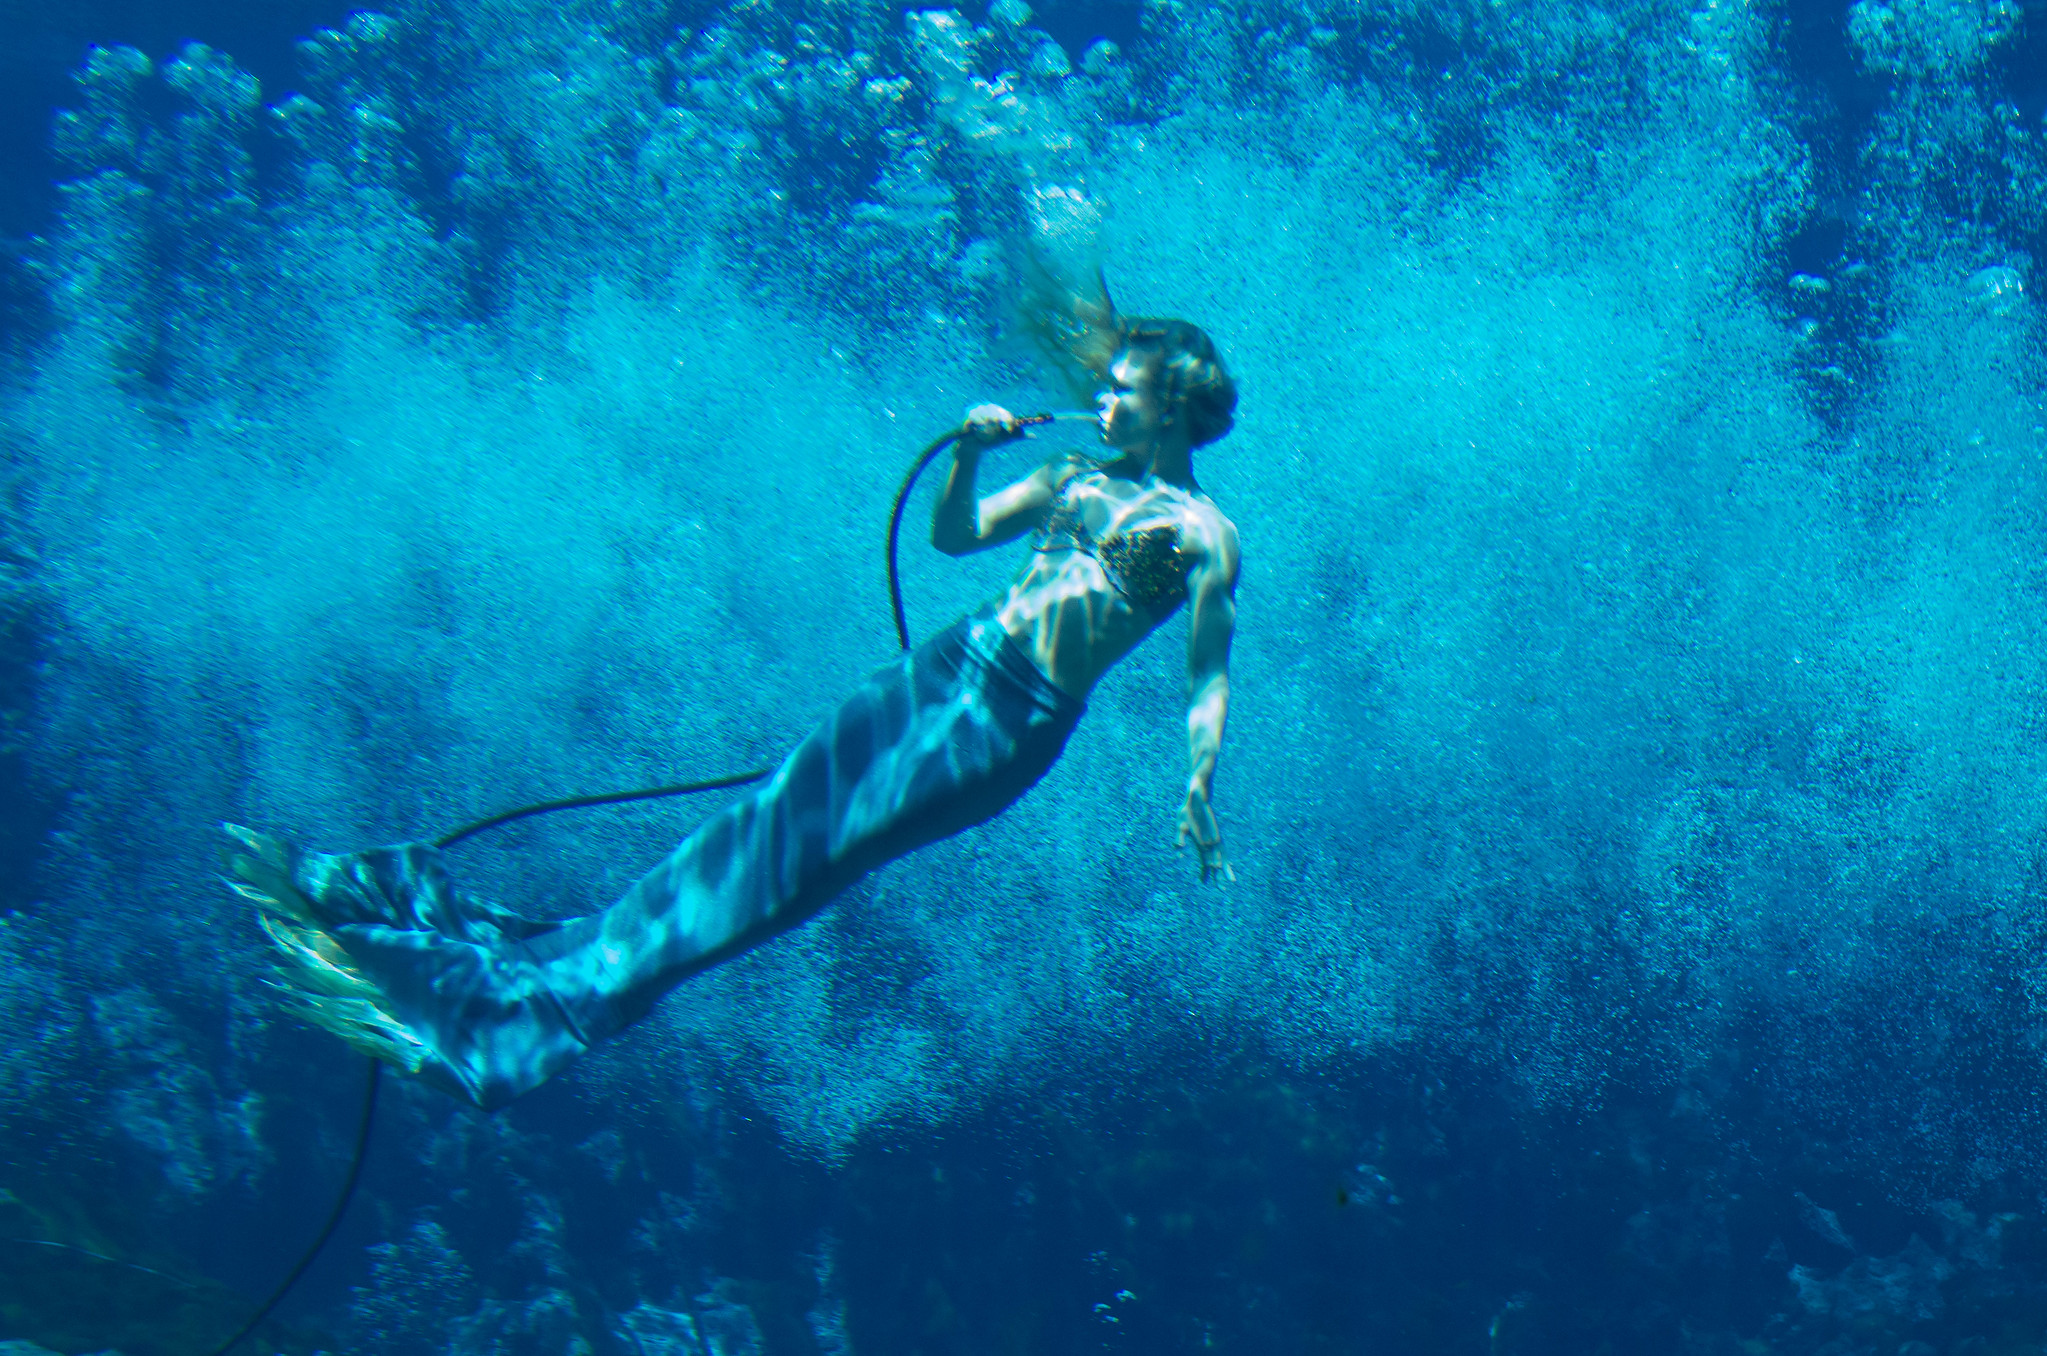 <p>If you’ve ever wanted to see a mermaid, this one’s for you. Weeki Wachee Springs State Park has lots of natural water attractions, including waterslides and a river boat tour of the area. </p>  <p>But the most popular display here is the mermaid show at the underwater theater.</p>